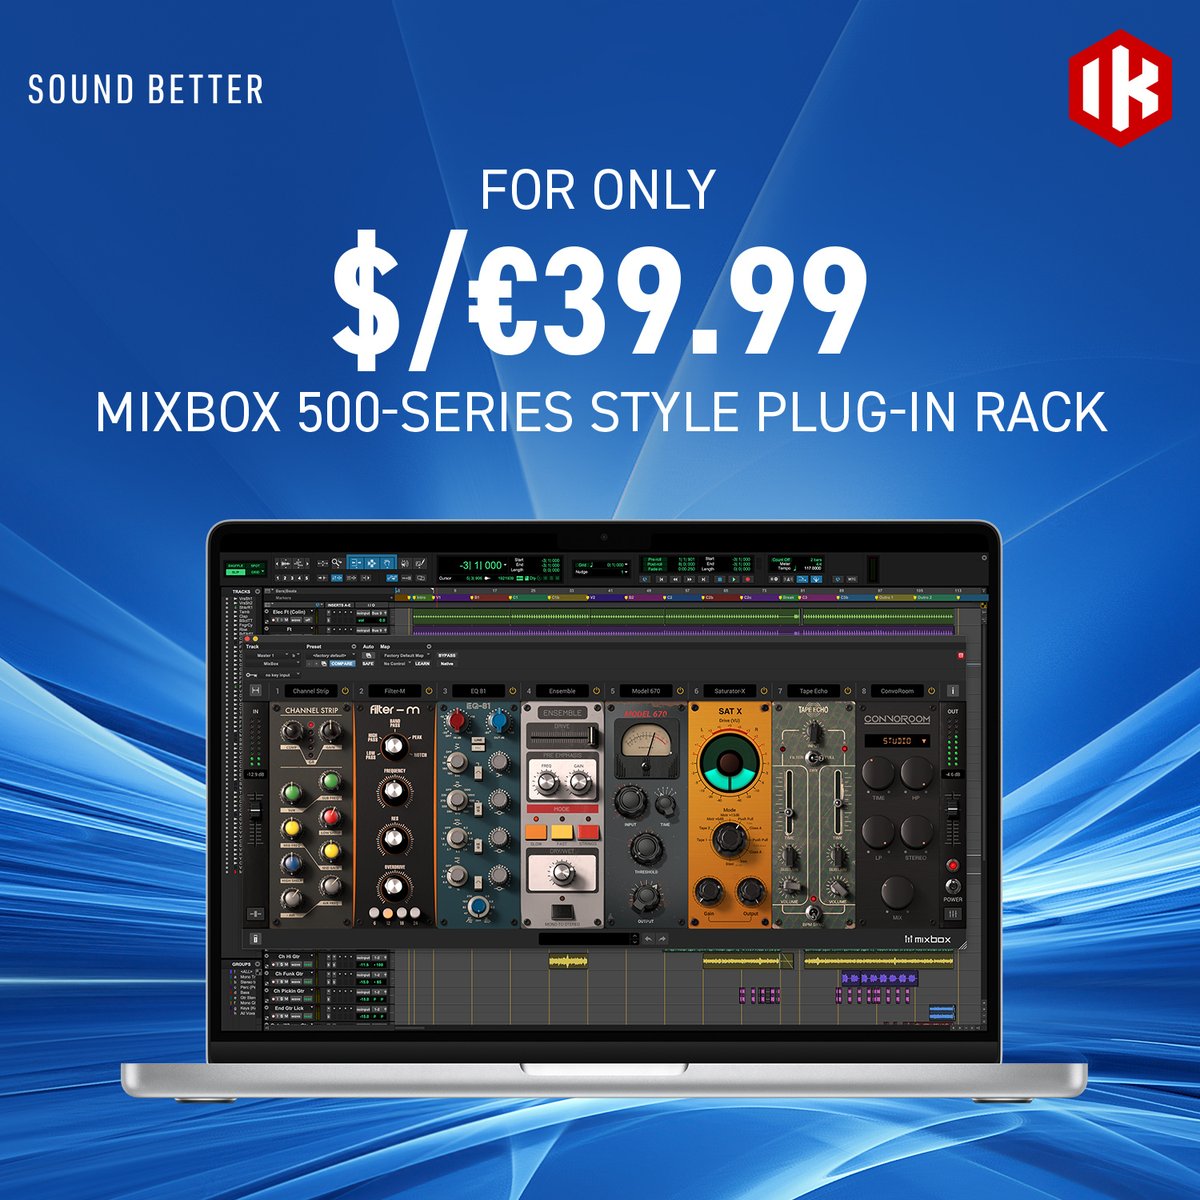 A complete mixing & FX toolbox for just $39.99?! bit.ly/mixboxkrazydeal